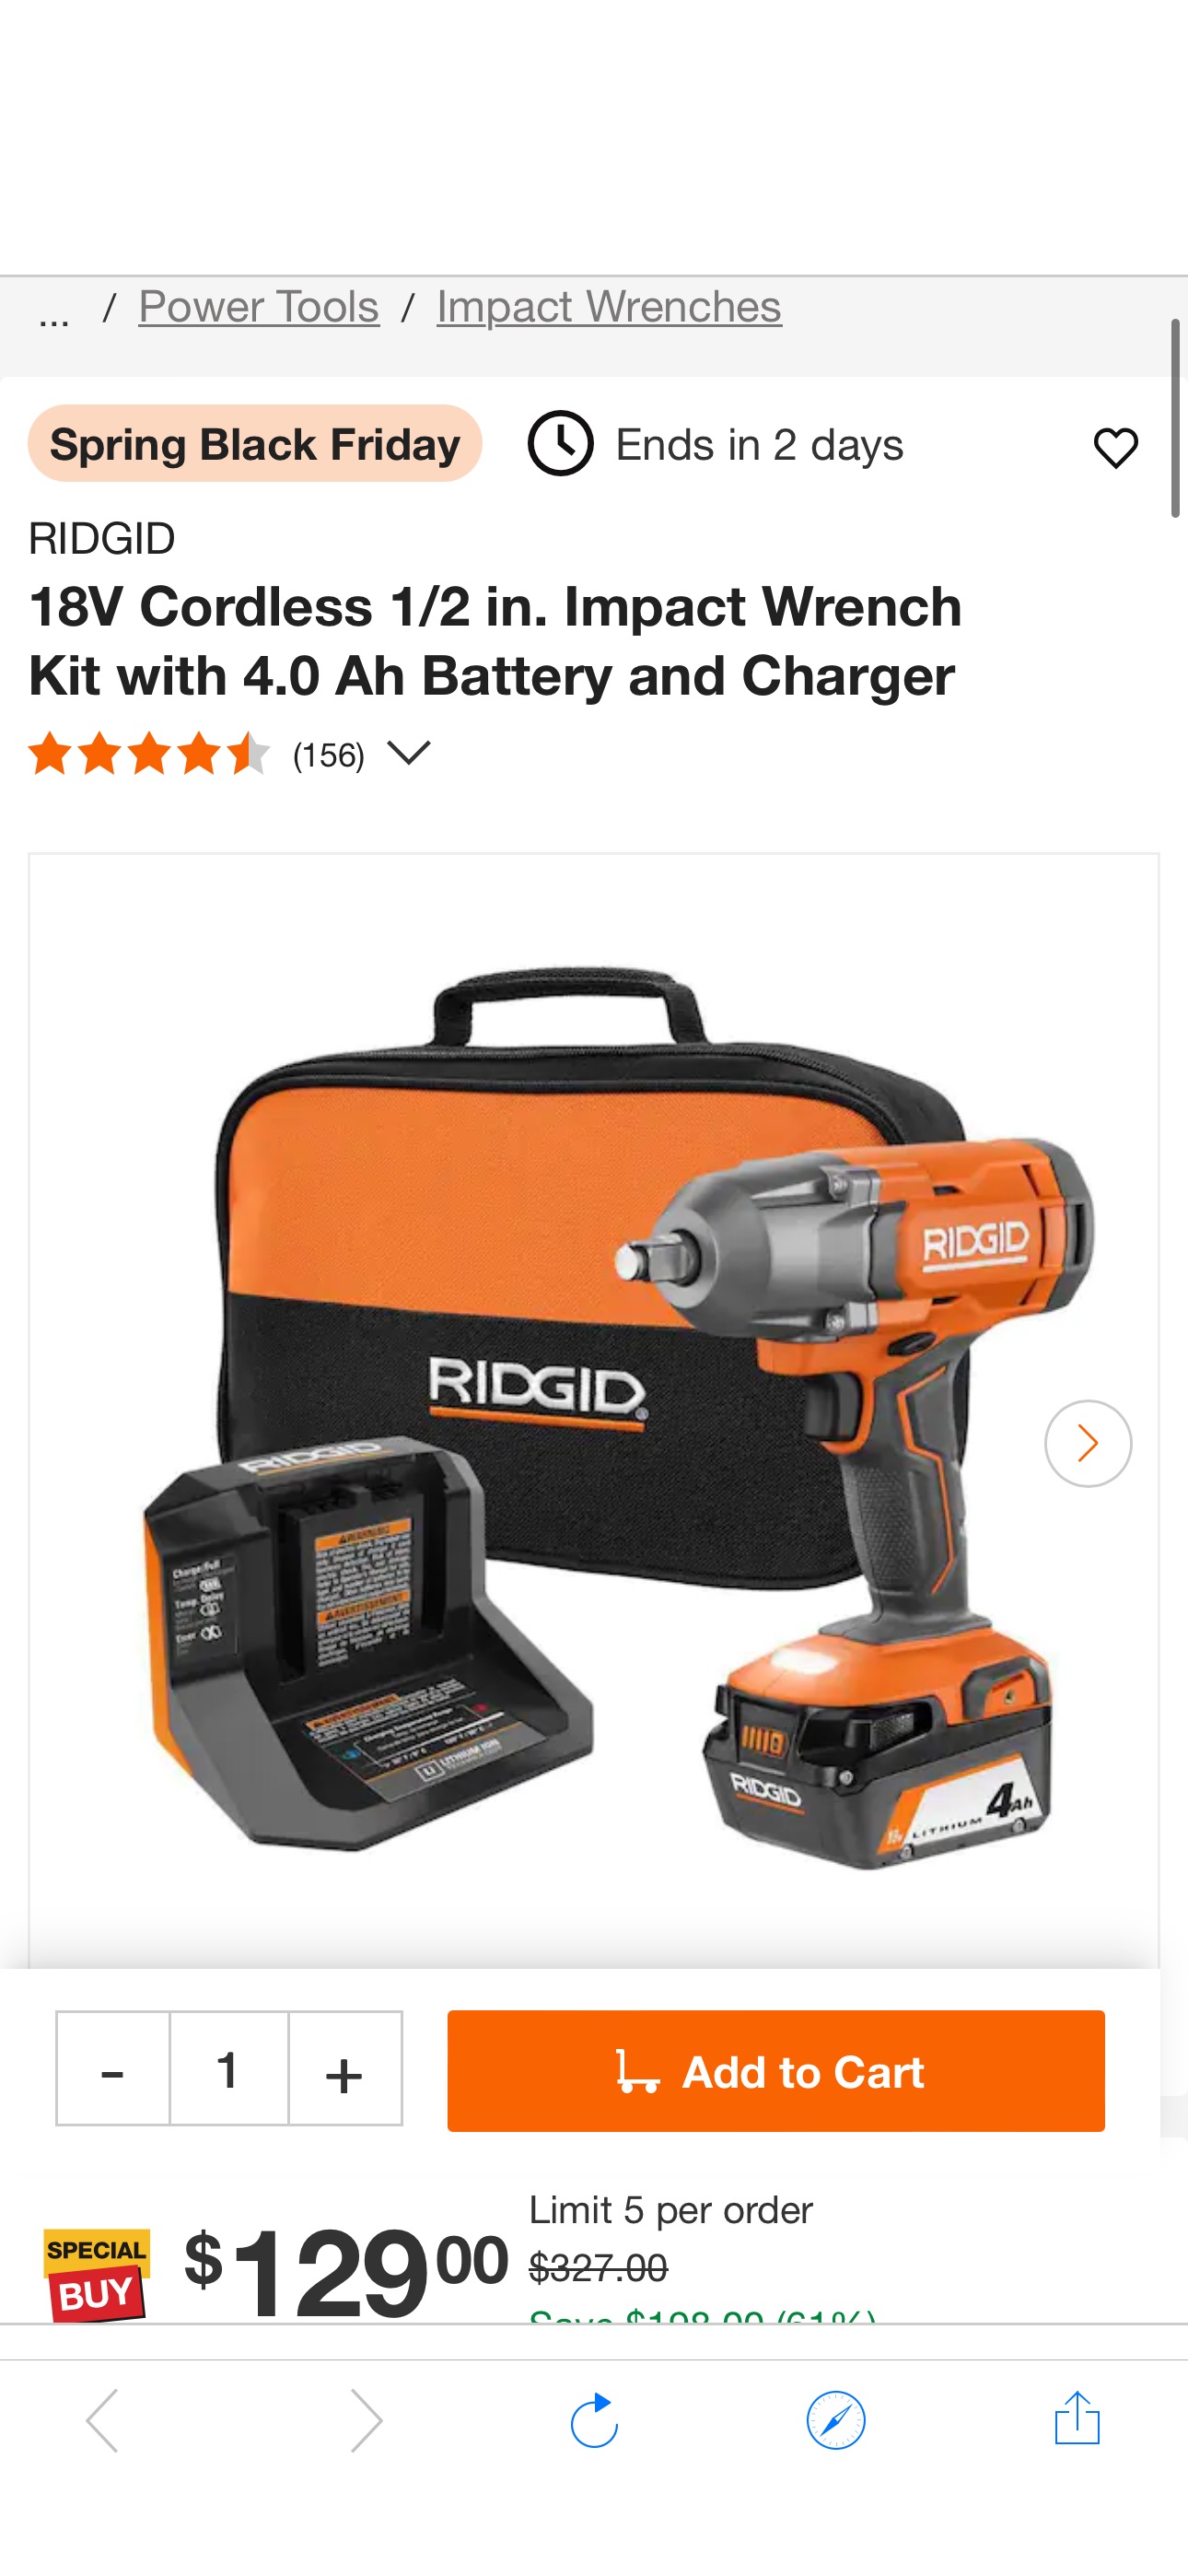 RIDGID 18V Cordless 1/2 in. Impact Wrench Kit with 4.0 Ah Battery and Charger R86215K - The Home Depot